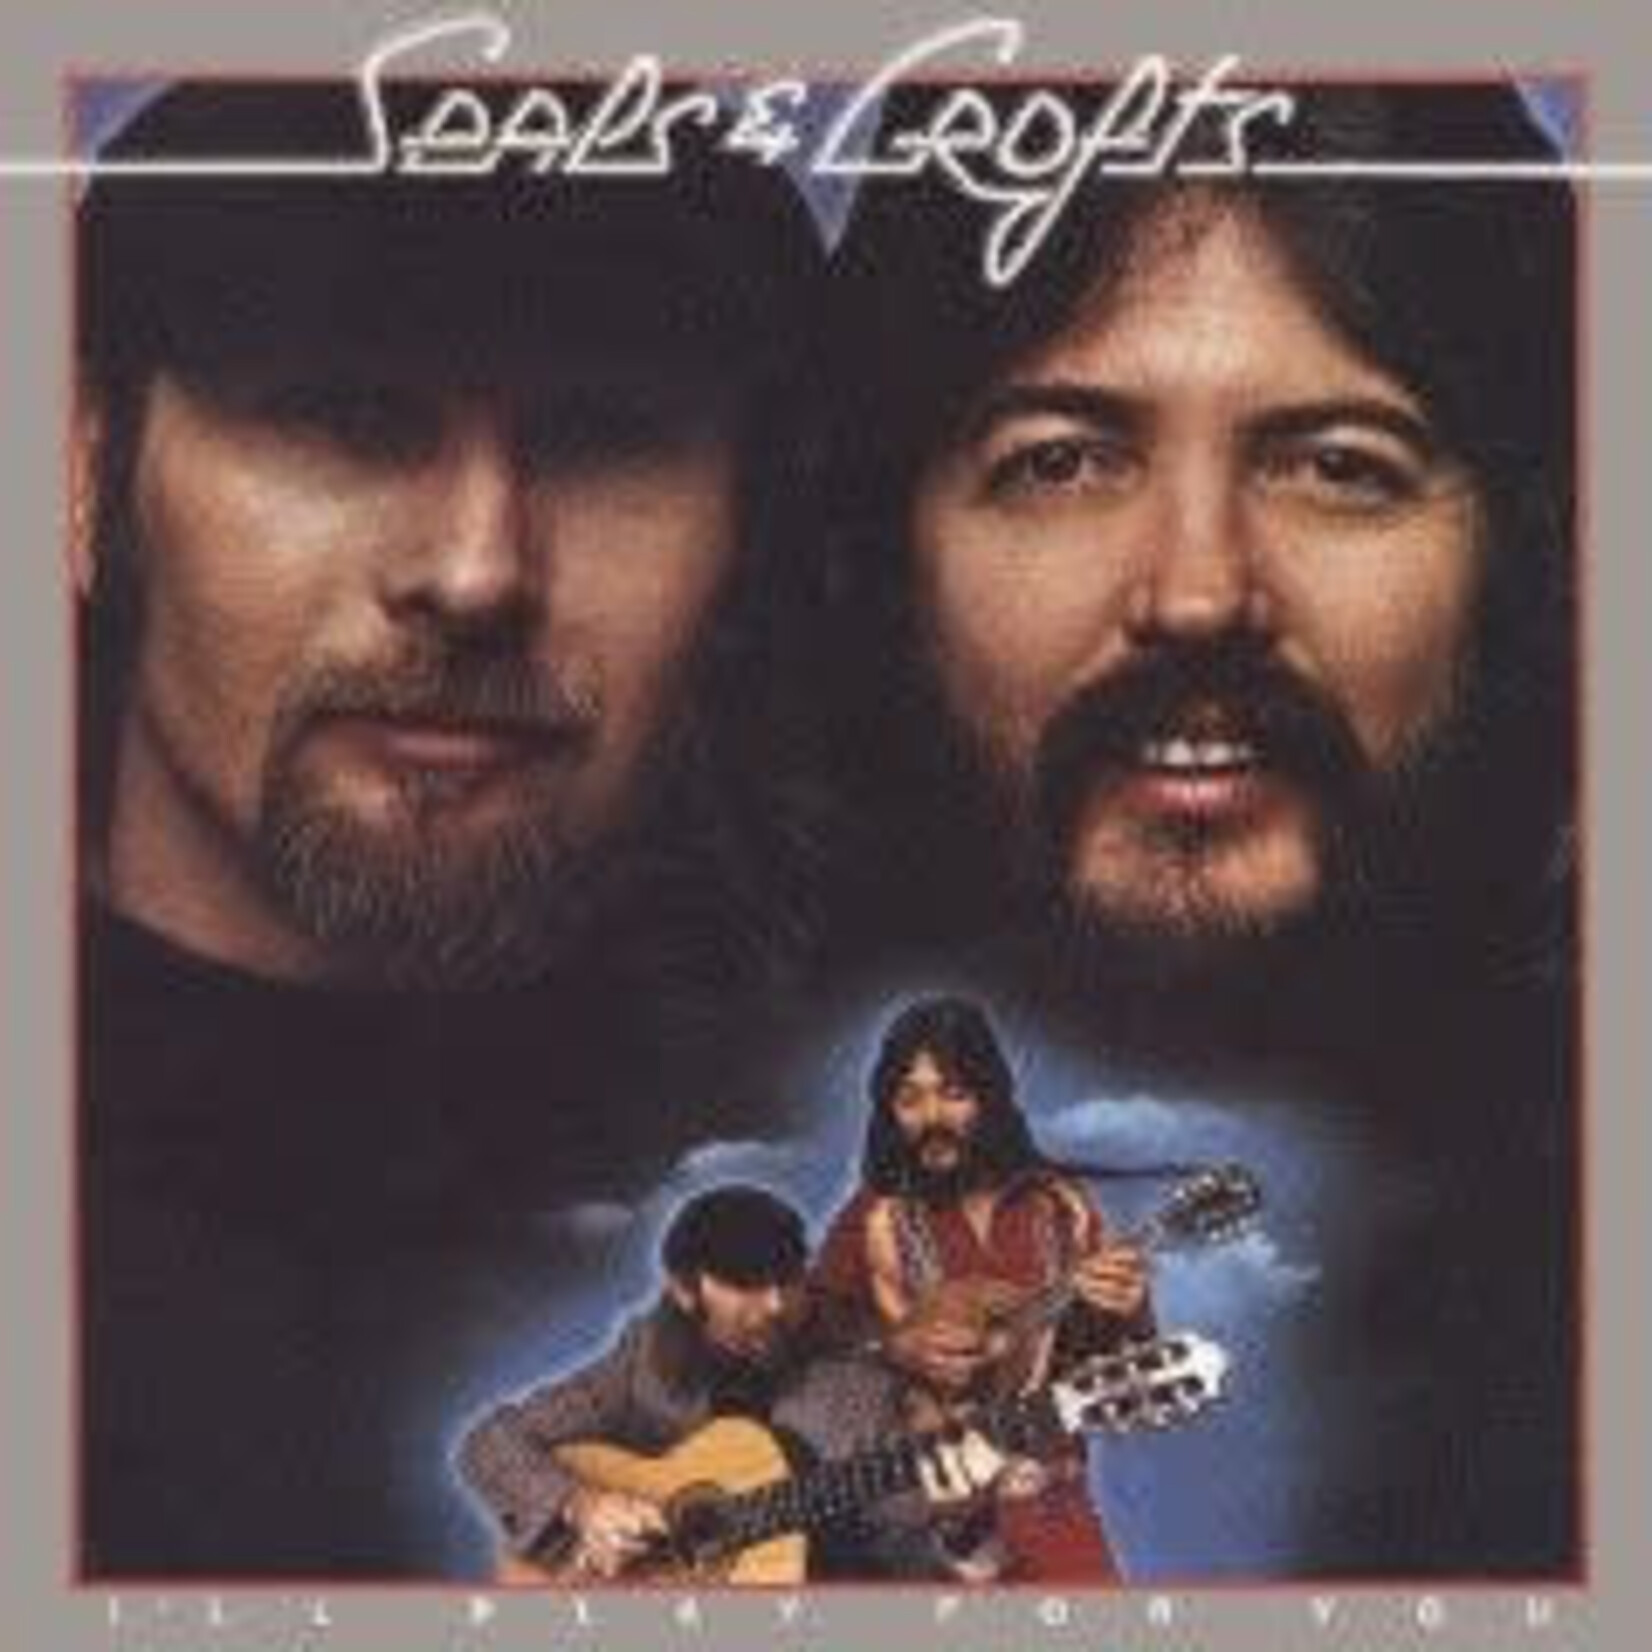 [Vintage] Seals & Crofts - I'll Play for You